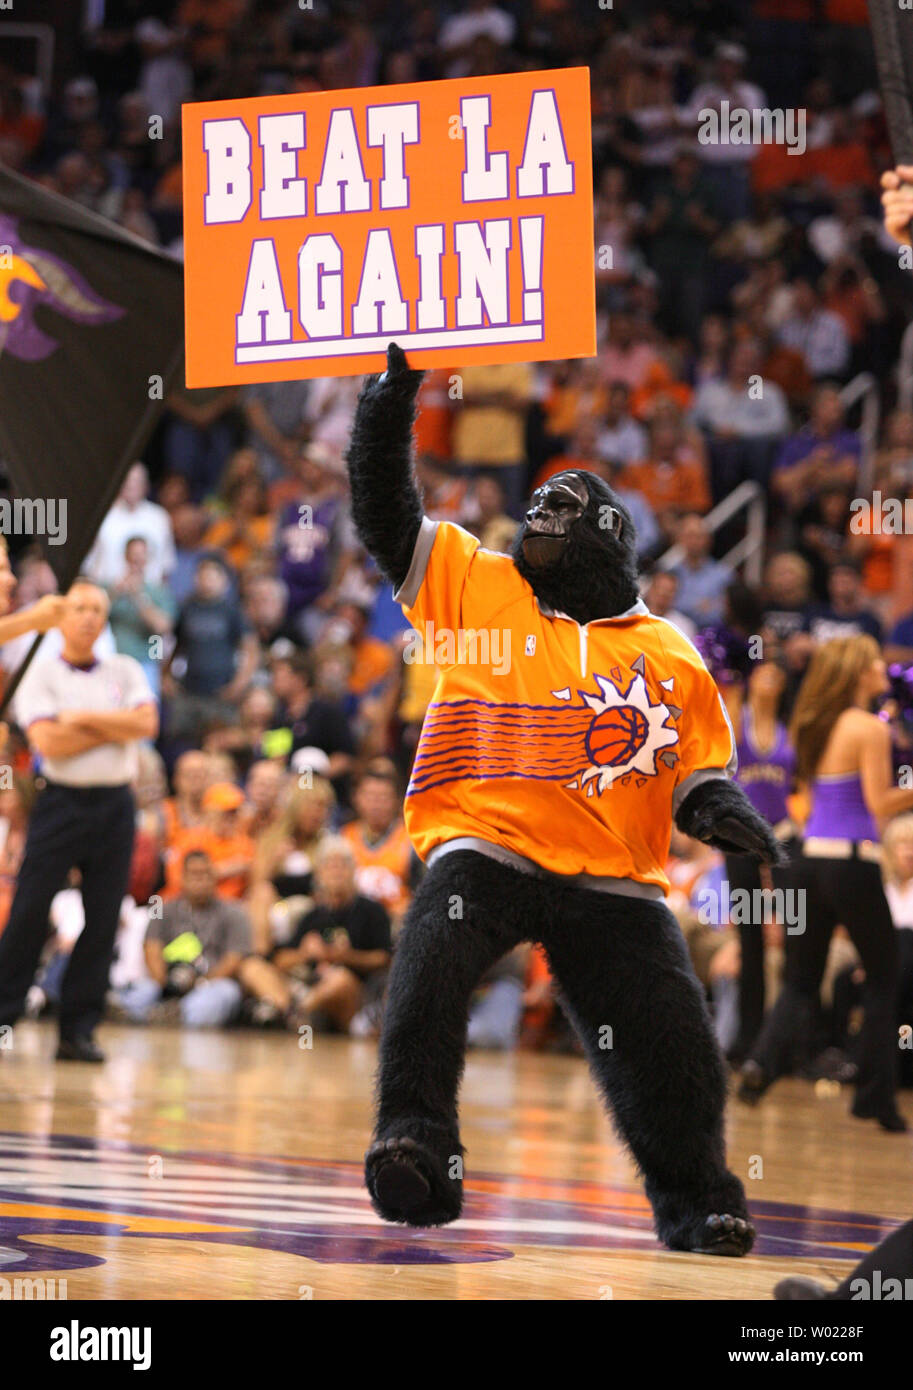 The Phoenix Suns mascot The Gorilla holds a Suns dancer on his